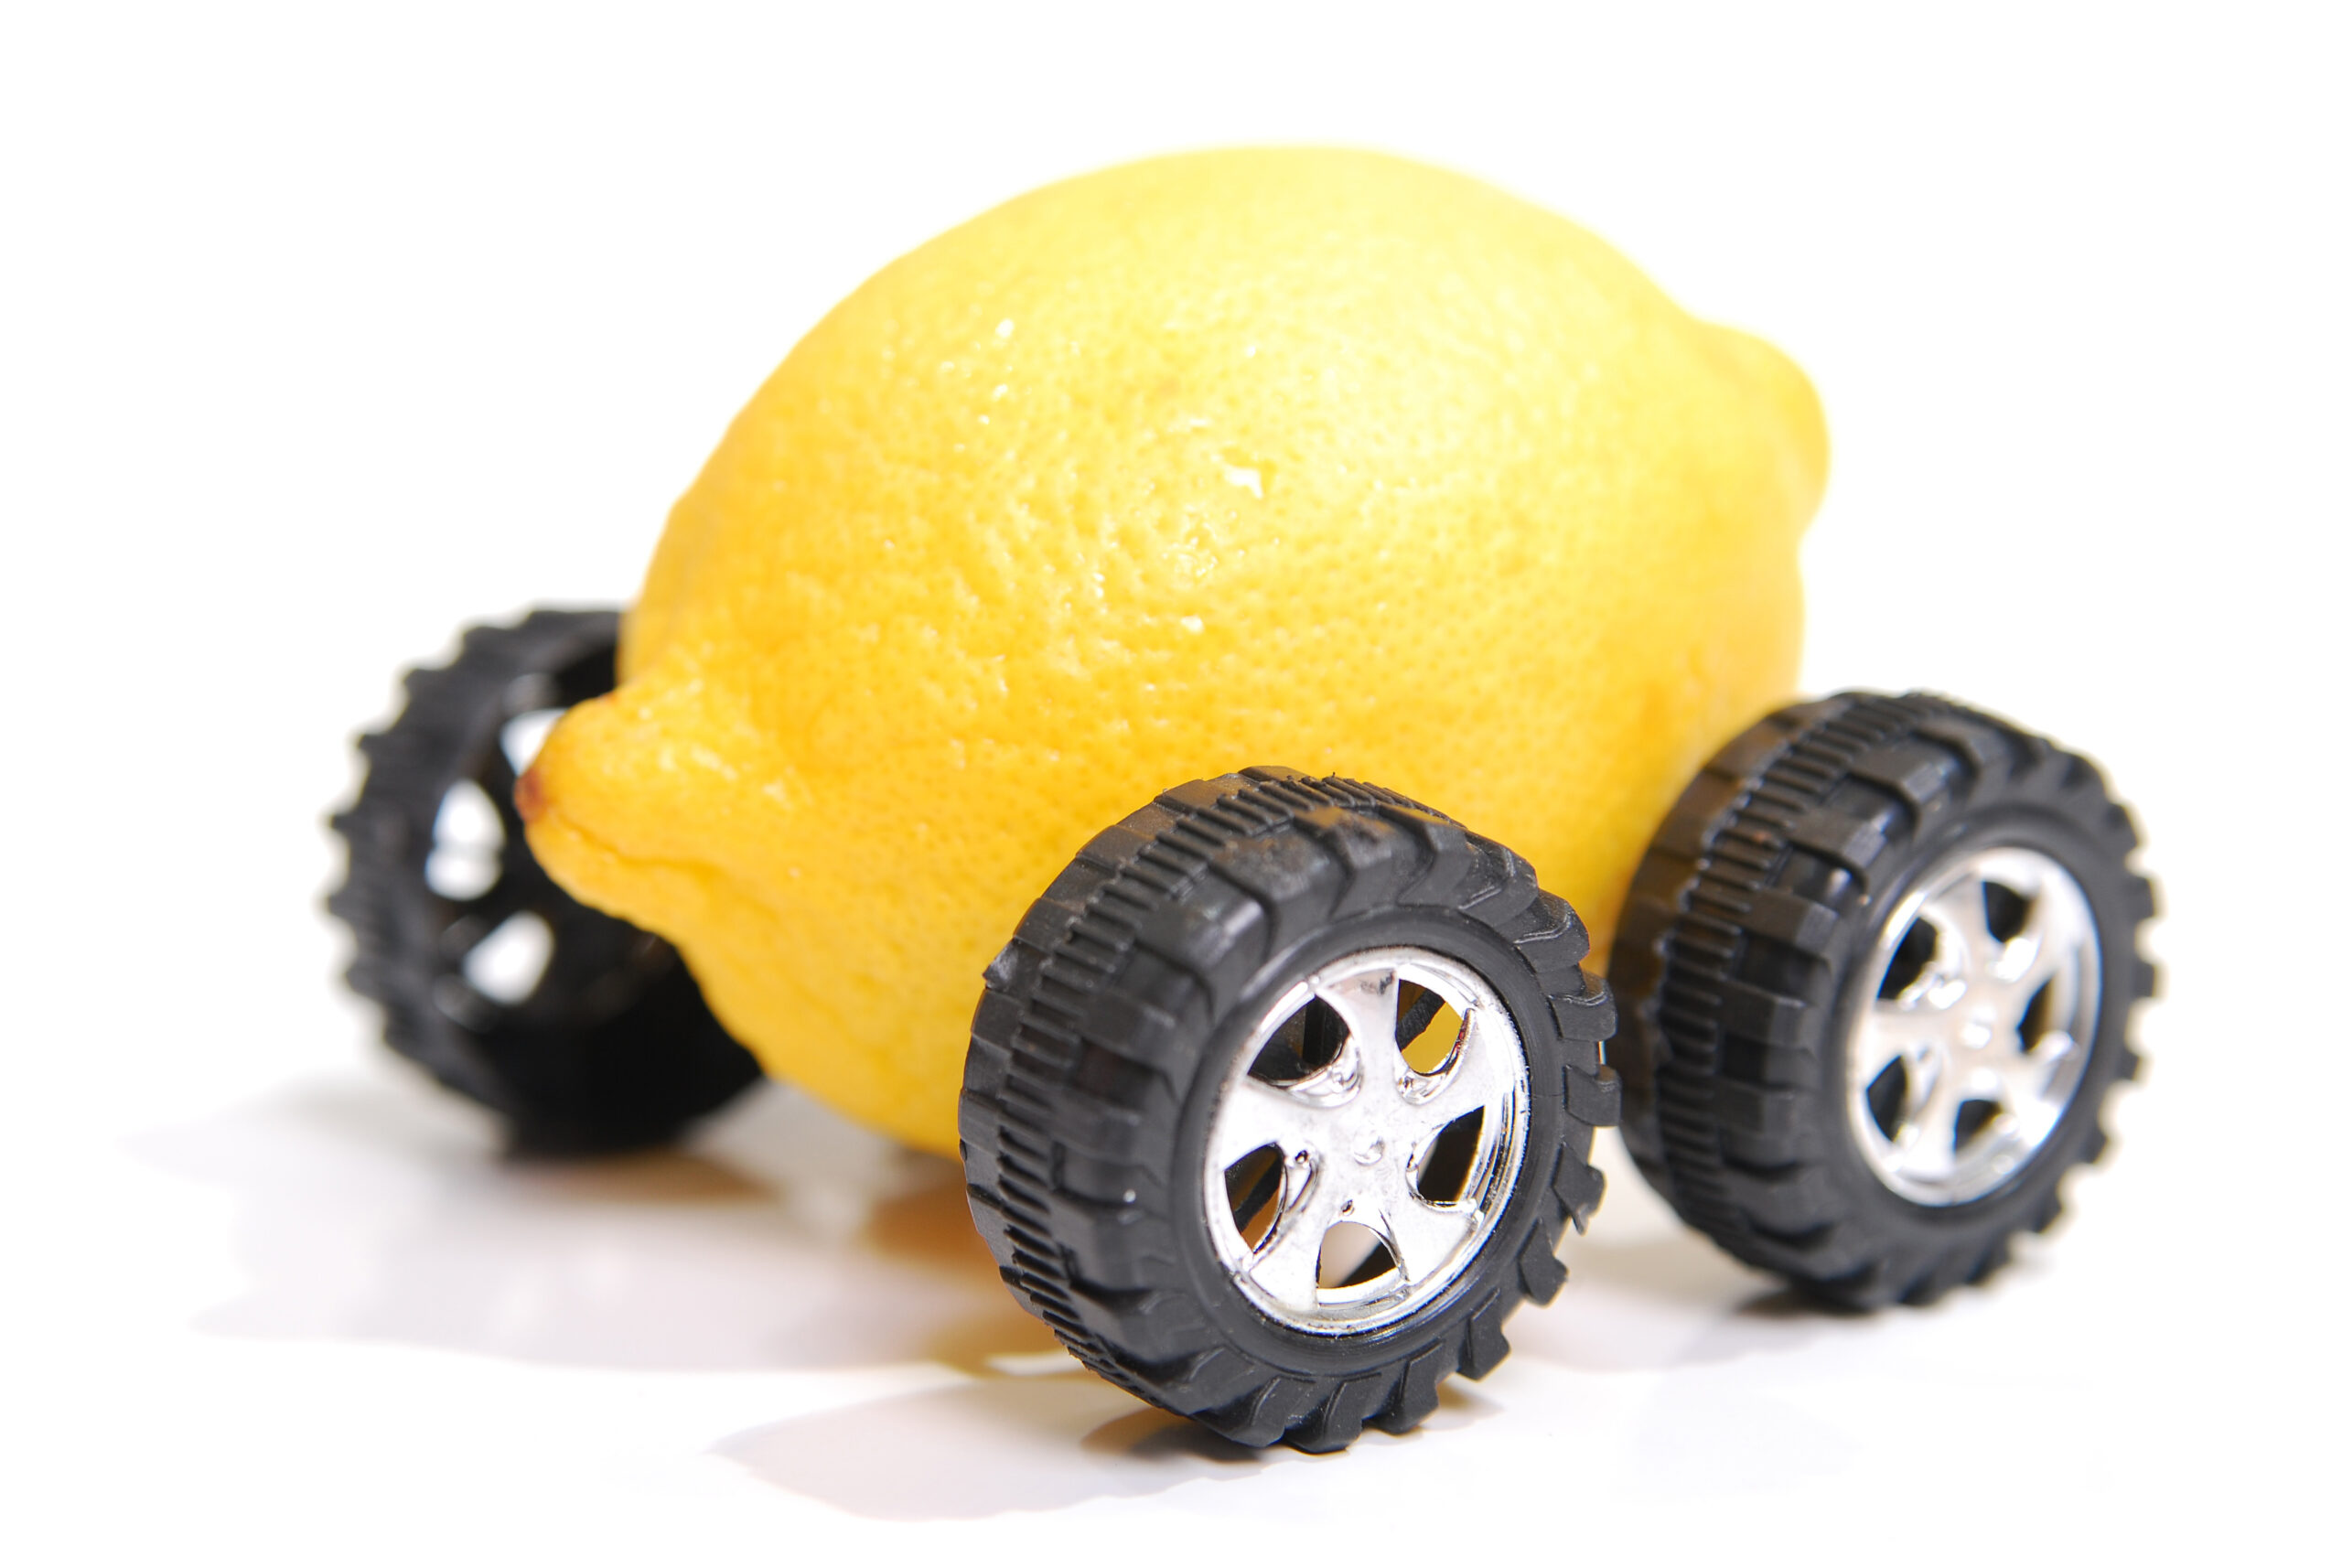 A lemon with wheels representing a defective vehicle. Shallow depth of field focus on fron wheel and front of lemon.